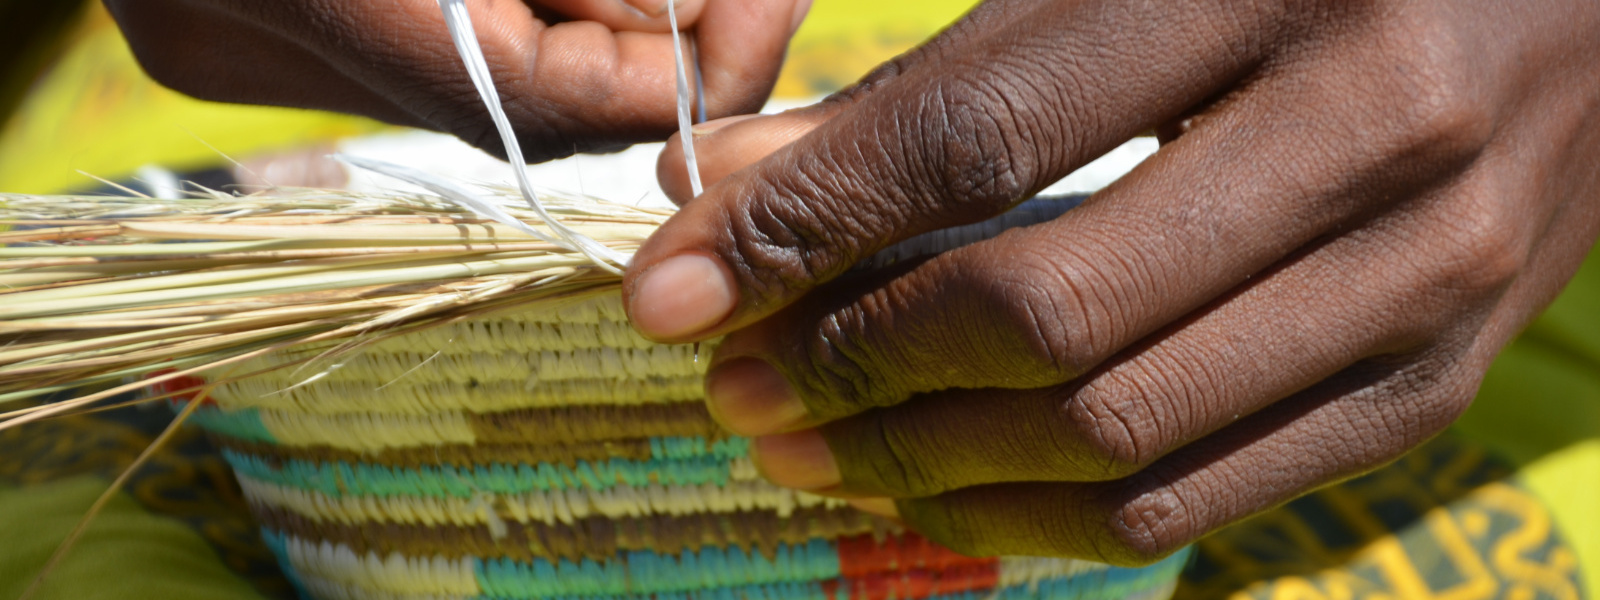 Woman's hand weaving brightly colored basket